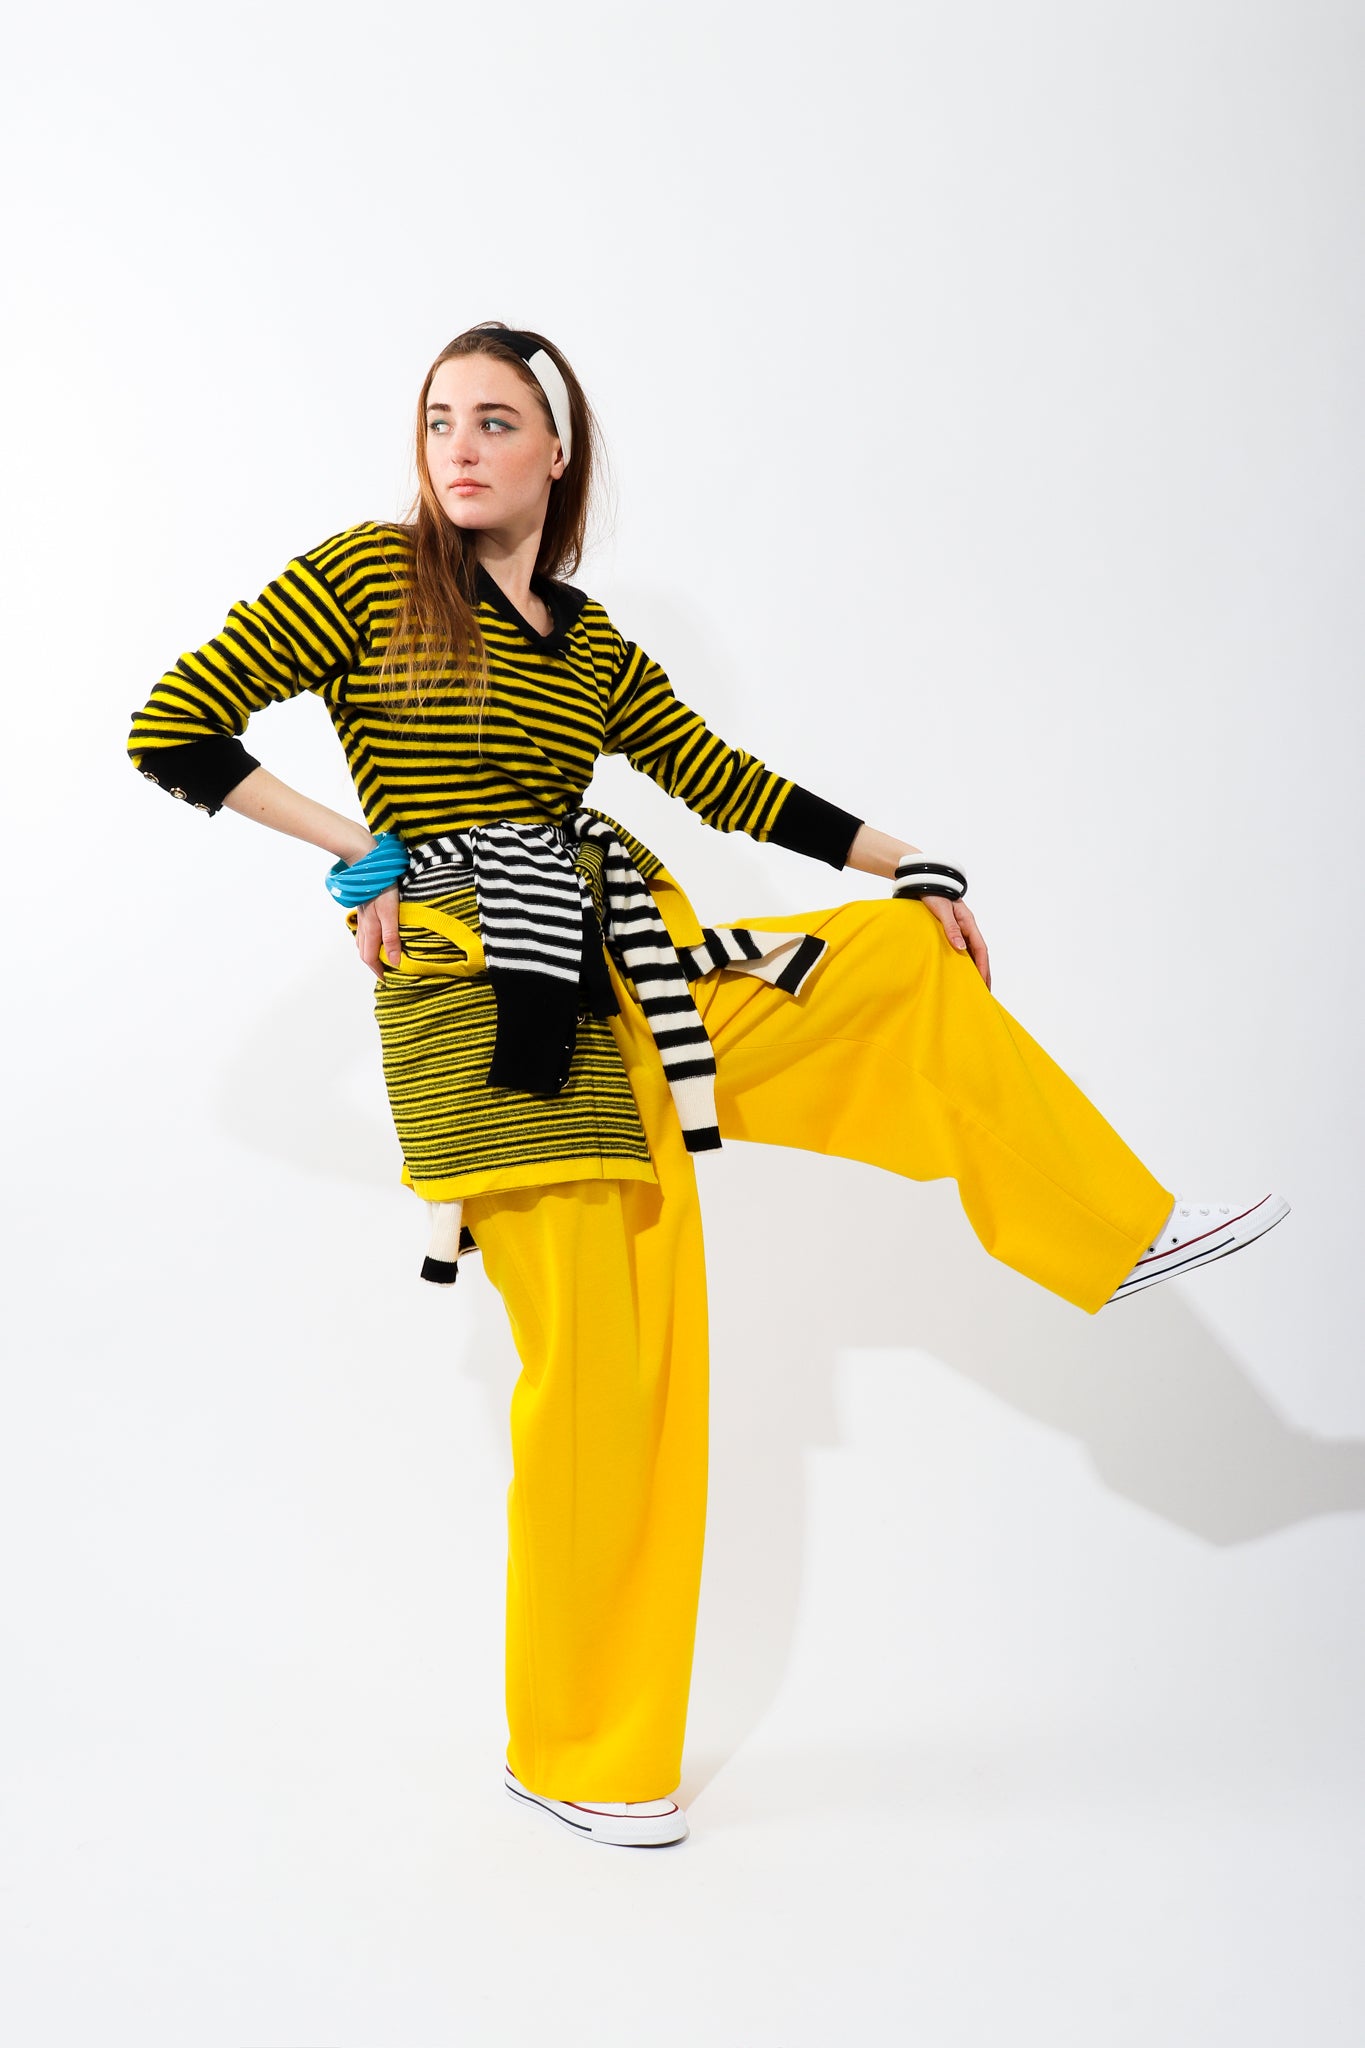 Recess Vintage Sonia Rykiel Rainbow Girl in yellow striped sweater and yellow pants on one leg